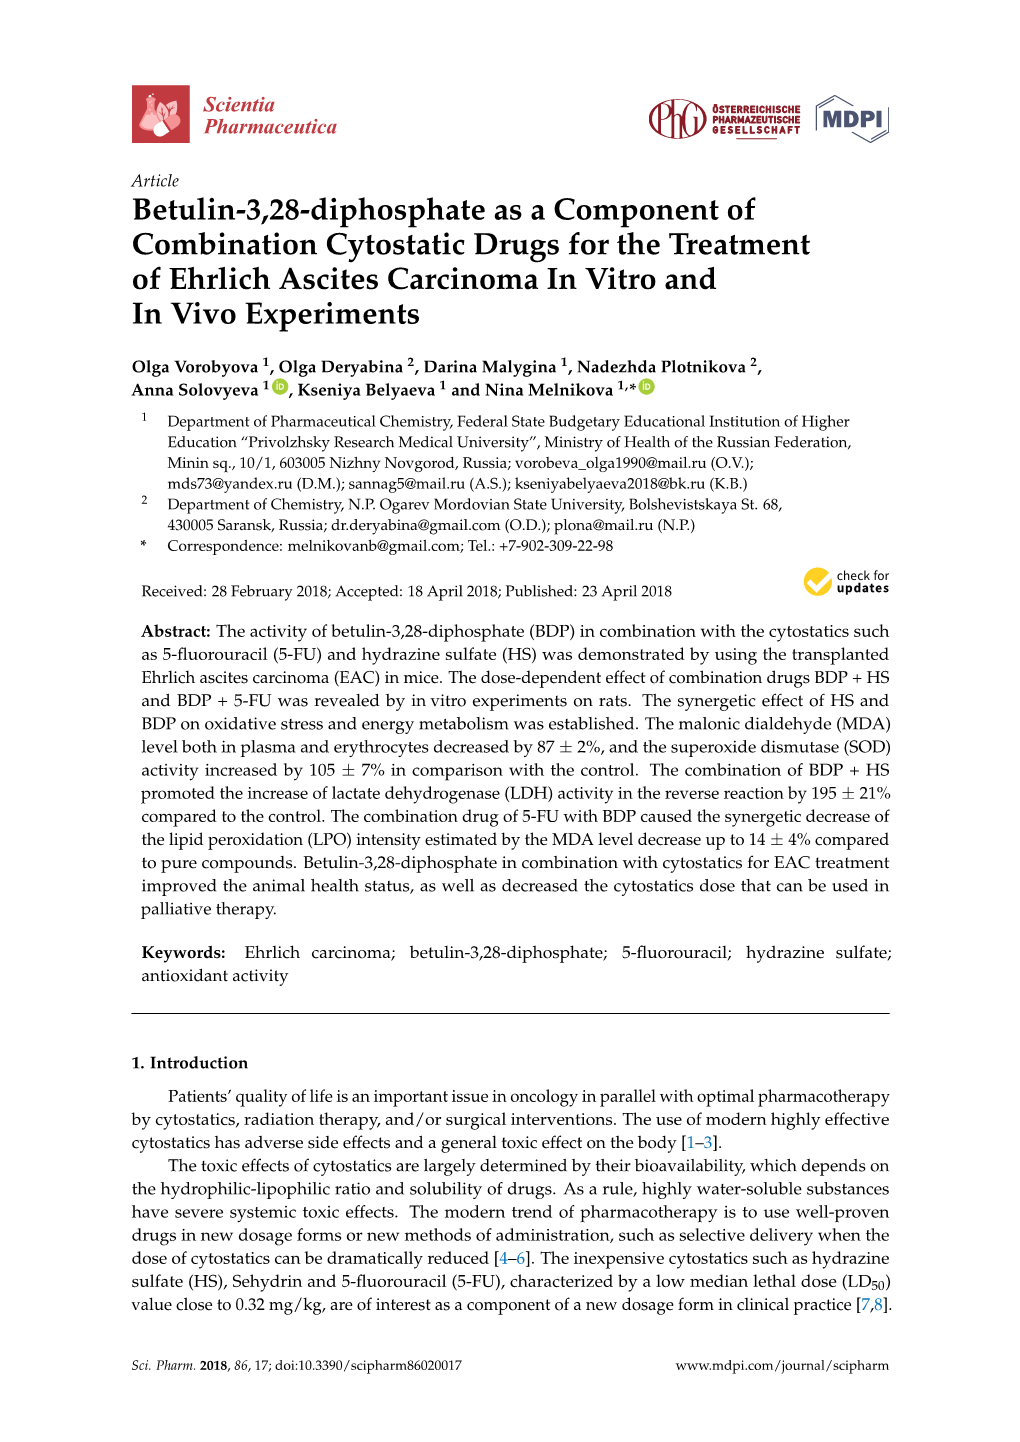 Betulin-3,28-Diphosphate As a Component of Combination Cytostatic Drugs for the Treatment of Ehrlich Ascites Carcinoma in Vitro and in Vivo Experiments